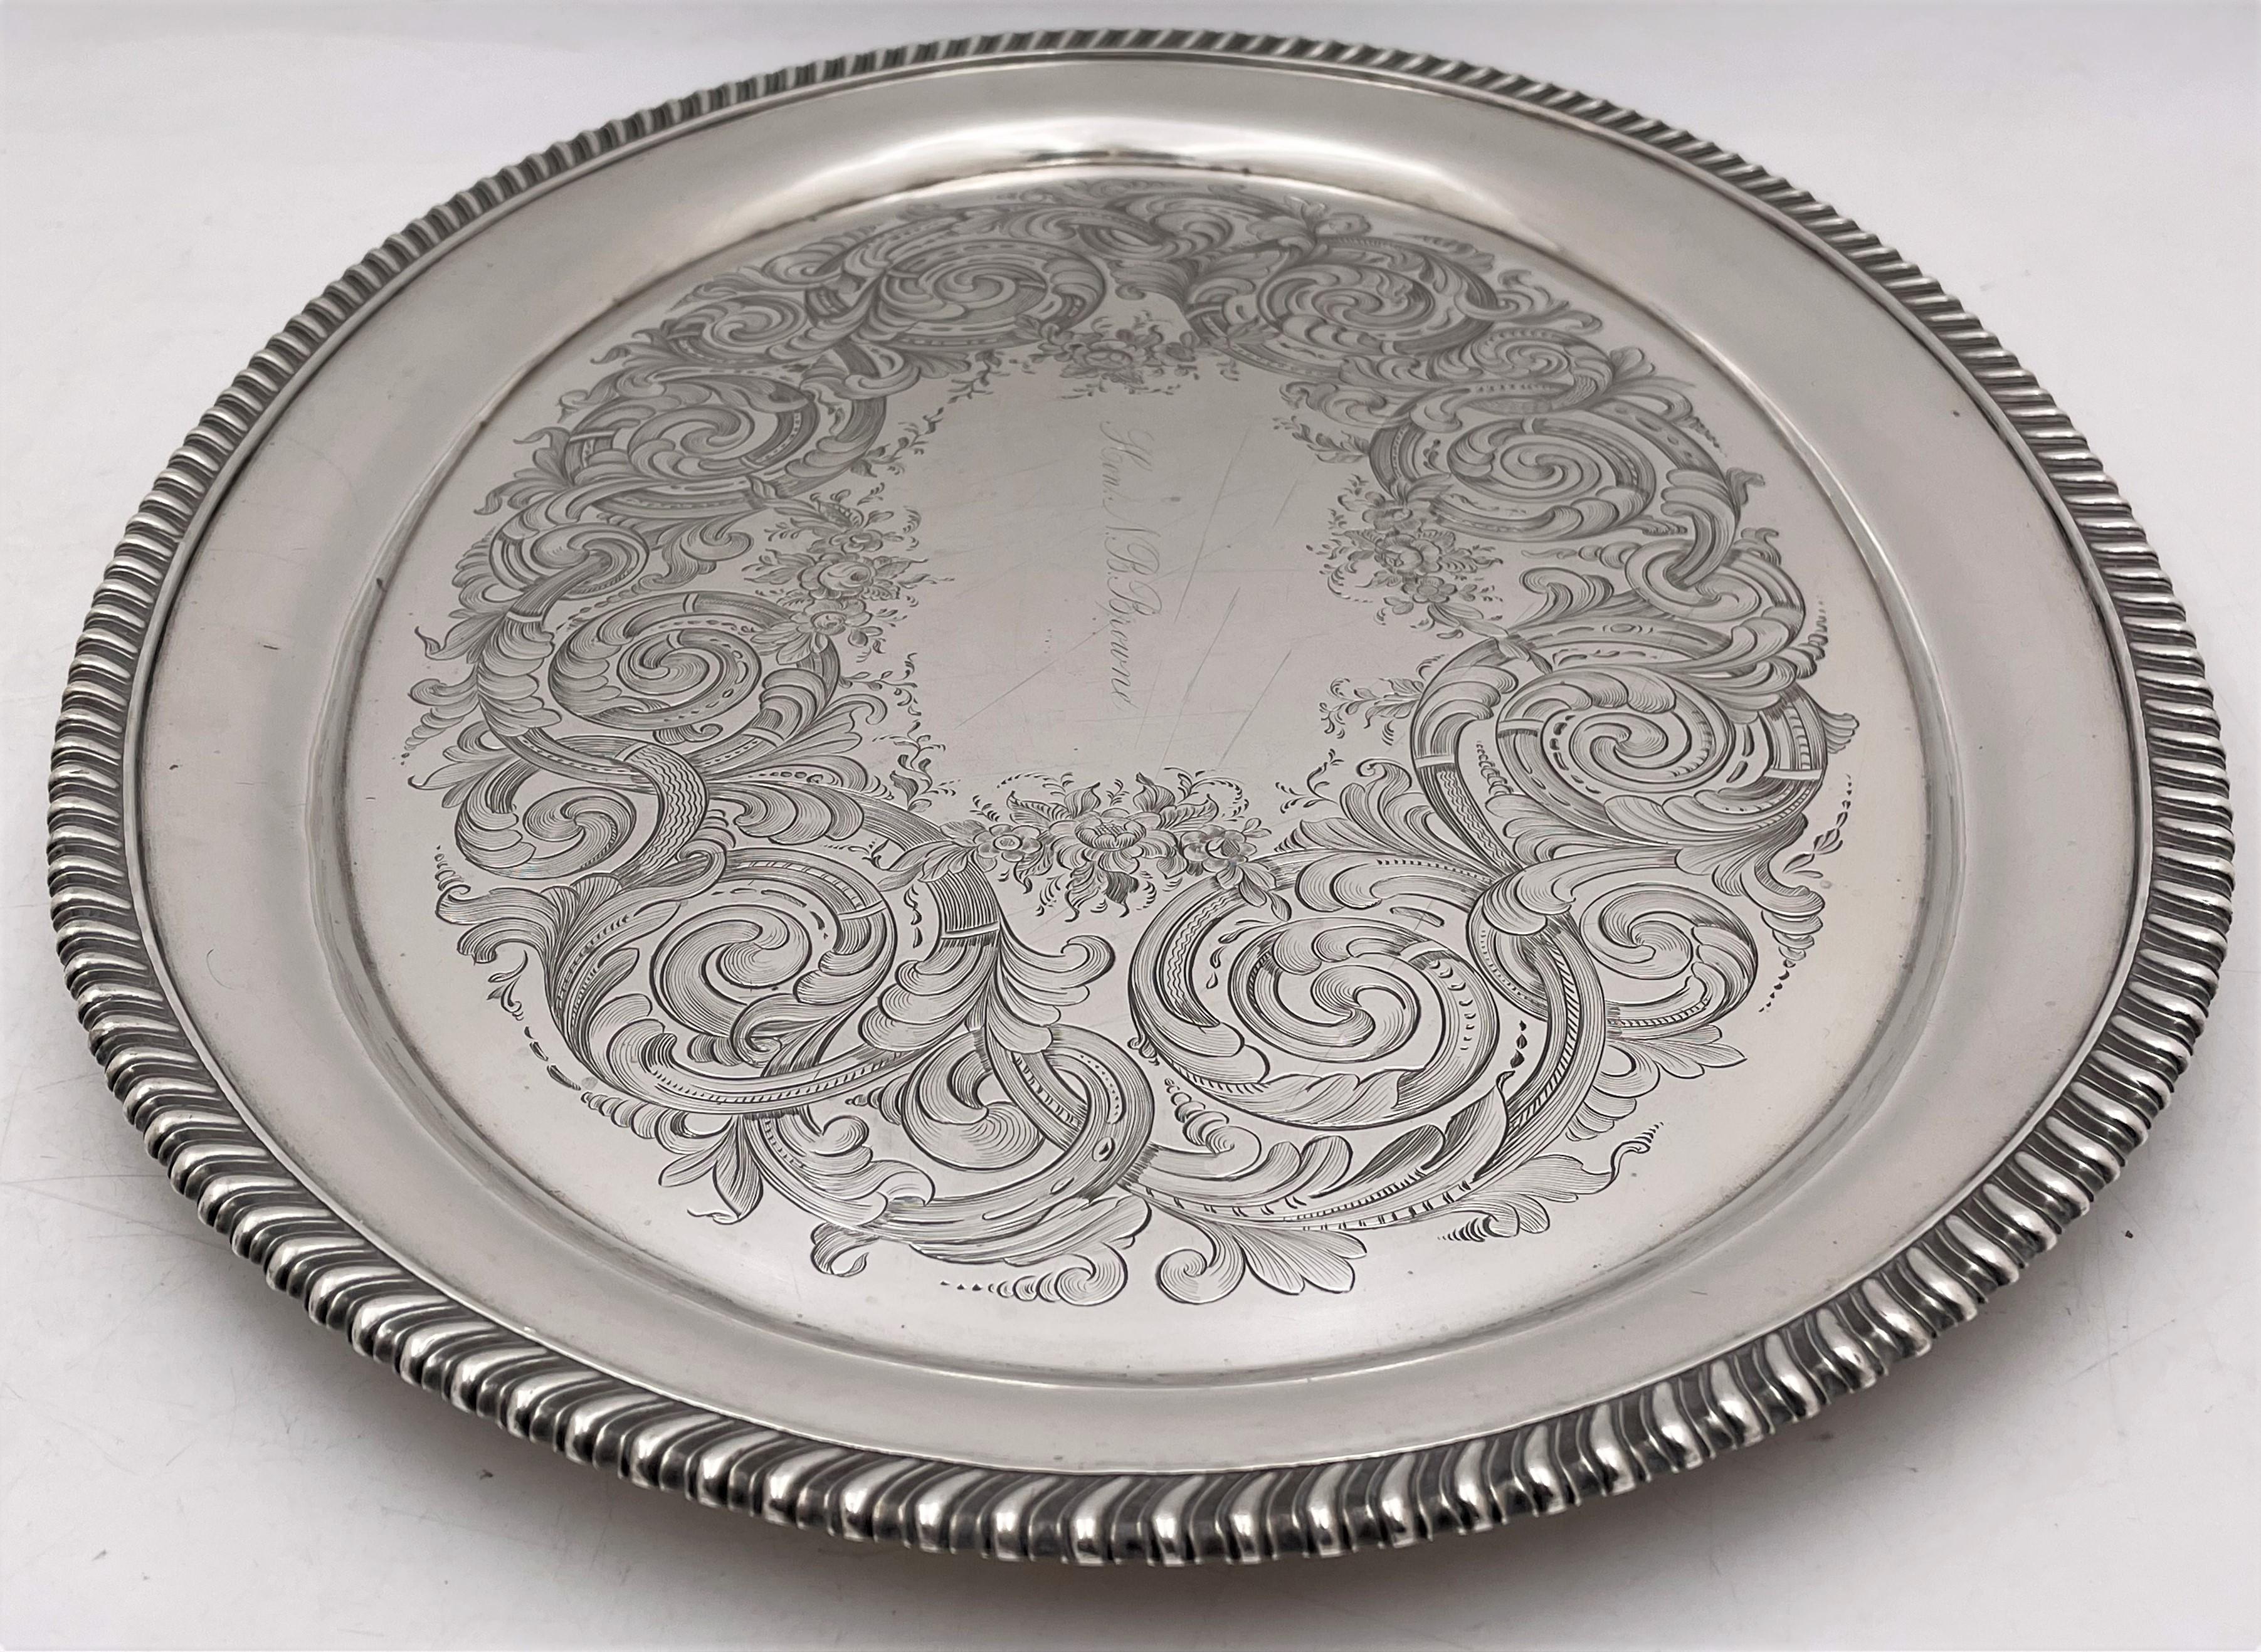 American Wilson Silver Platter/ Tray from Mid-19th Century for Ivy League UPenn Alum For Sale